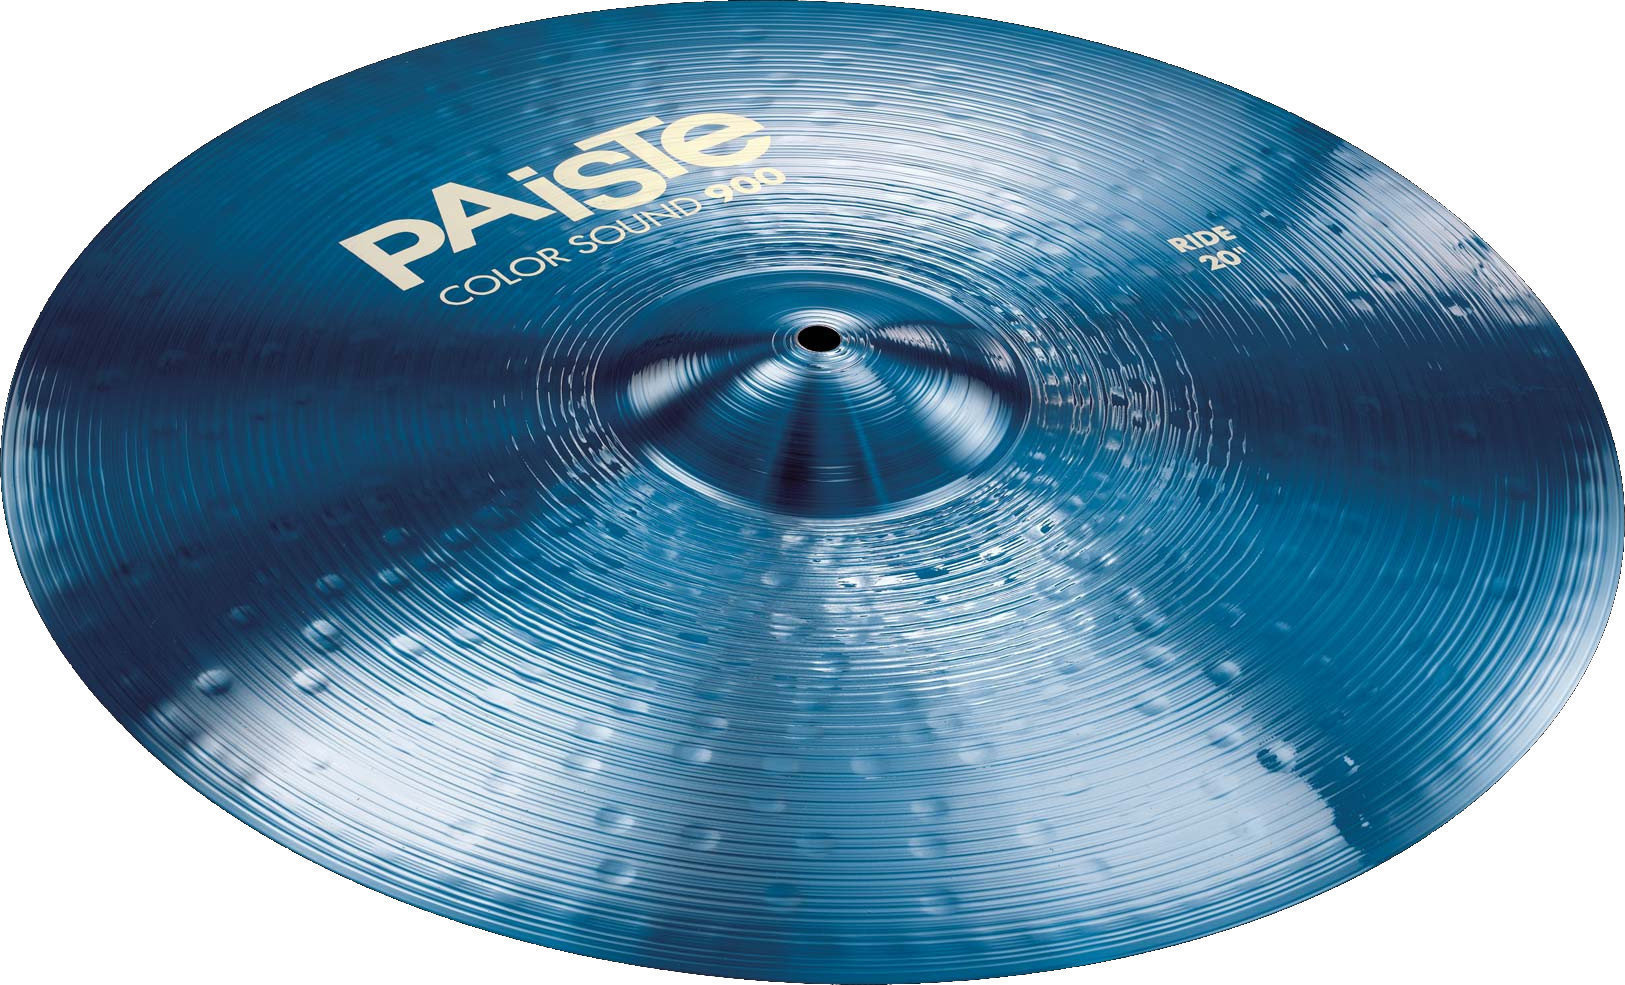 Ride Cymbal Paiste Color Sound 900 Ride Cymbal 20" Blå